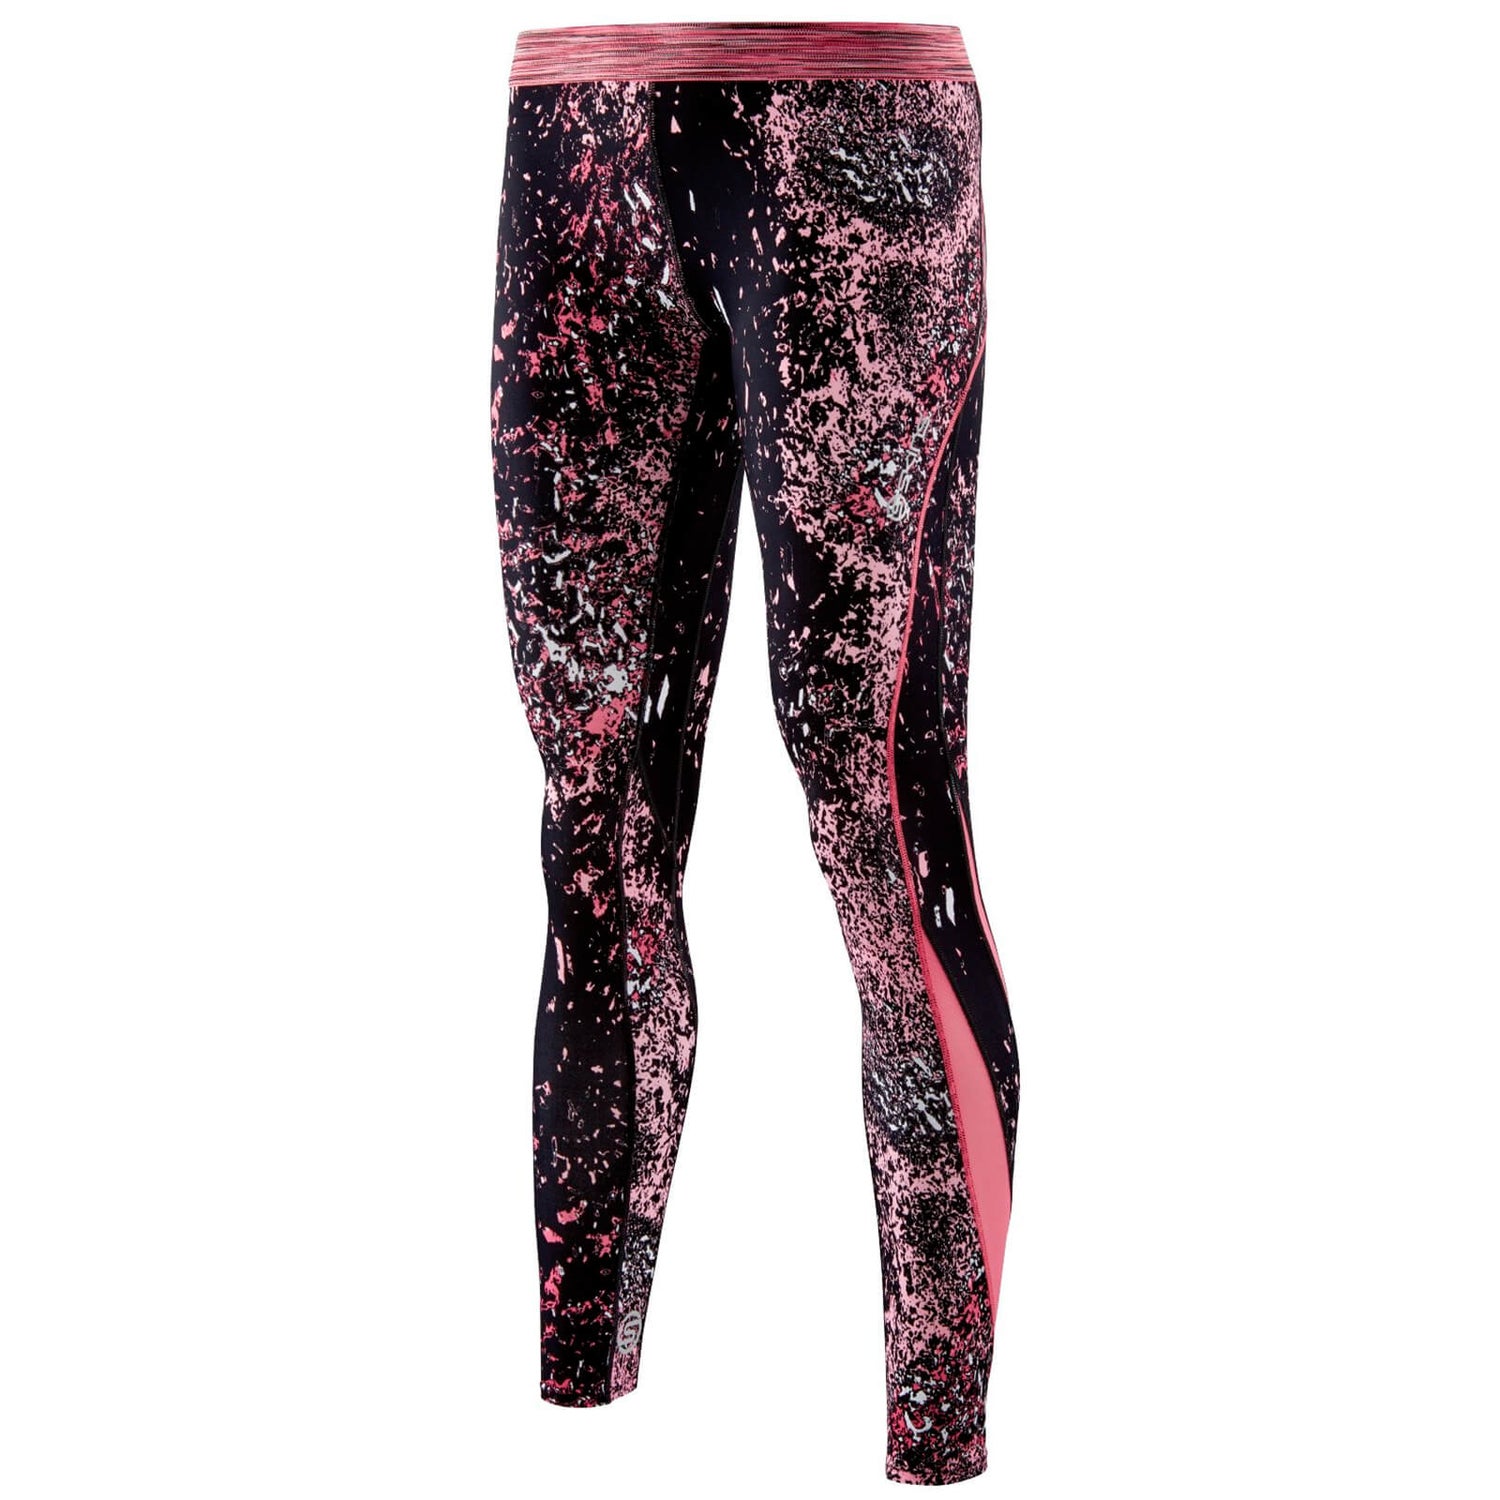 Skins DNAmic Compression Women's Tights